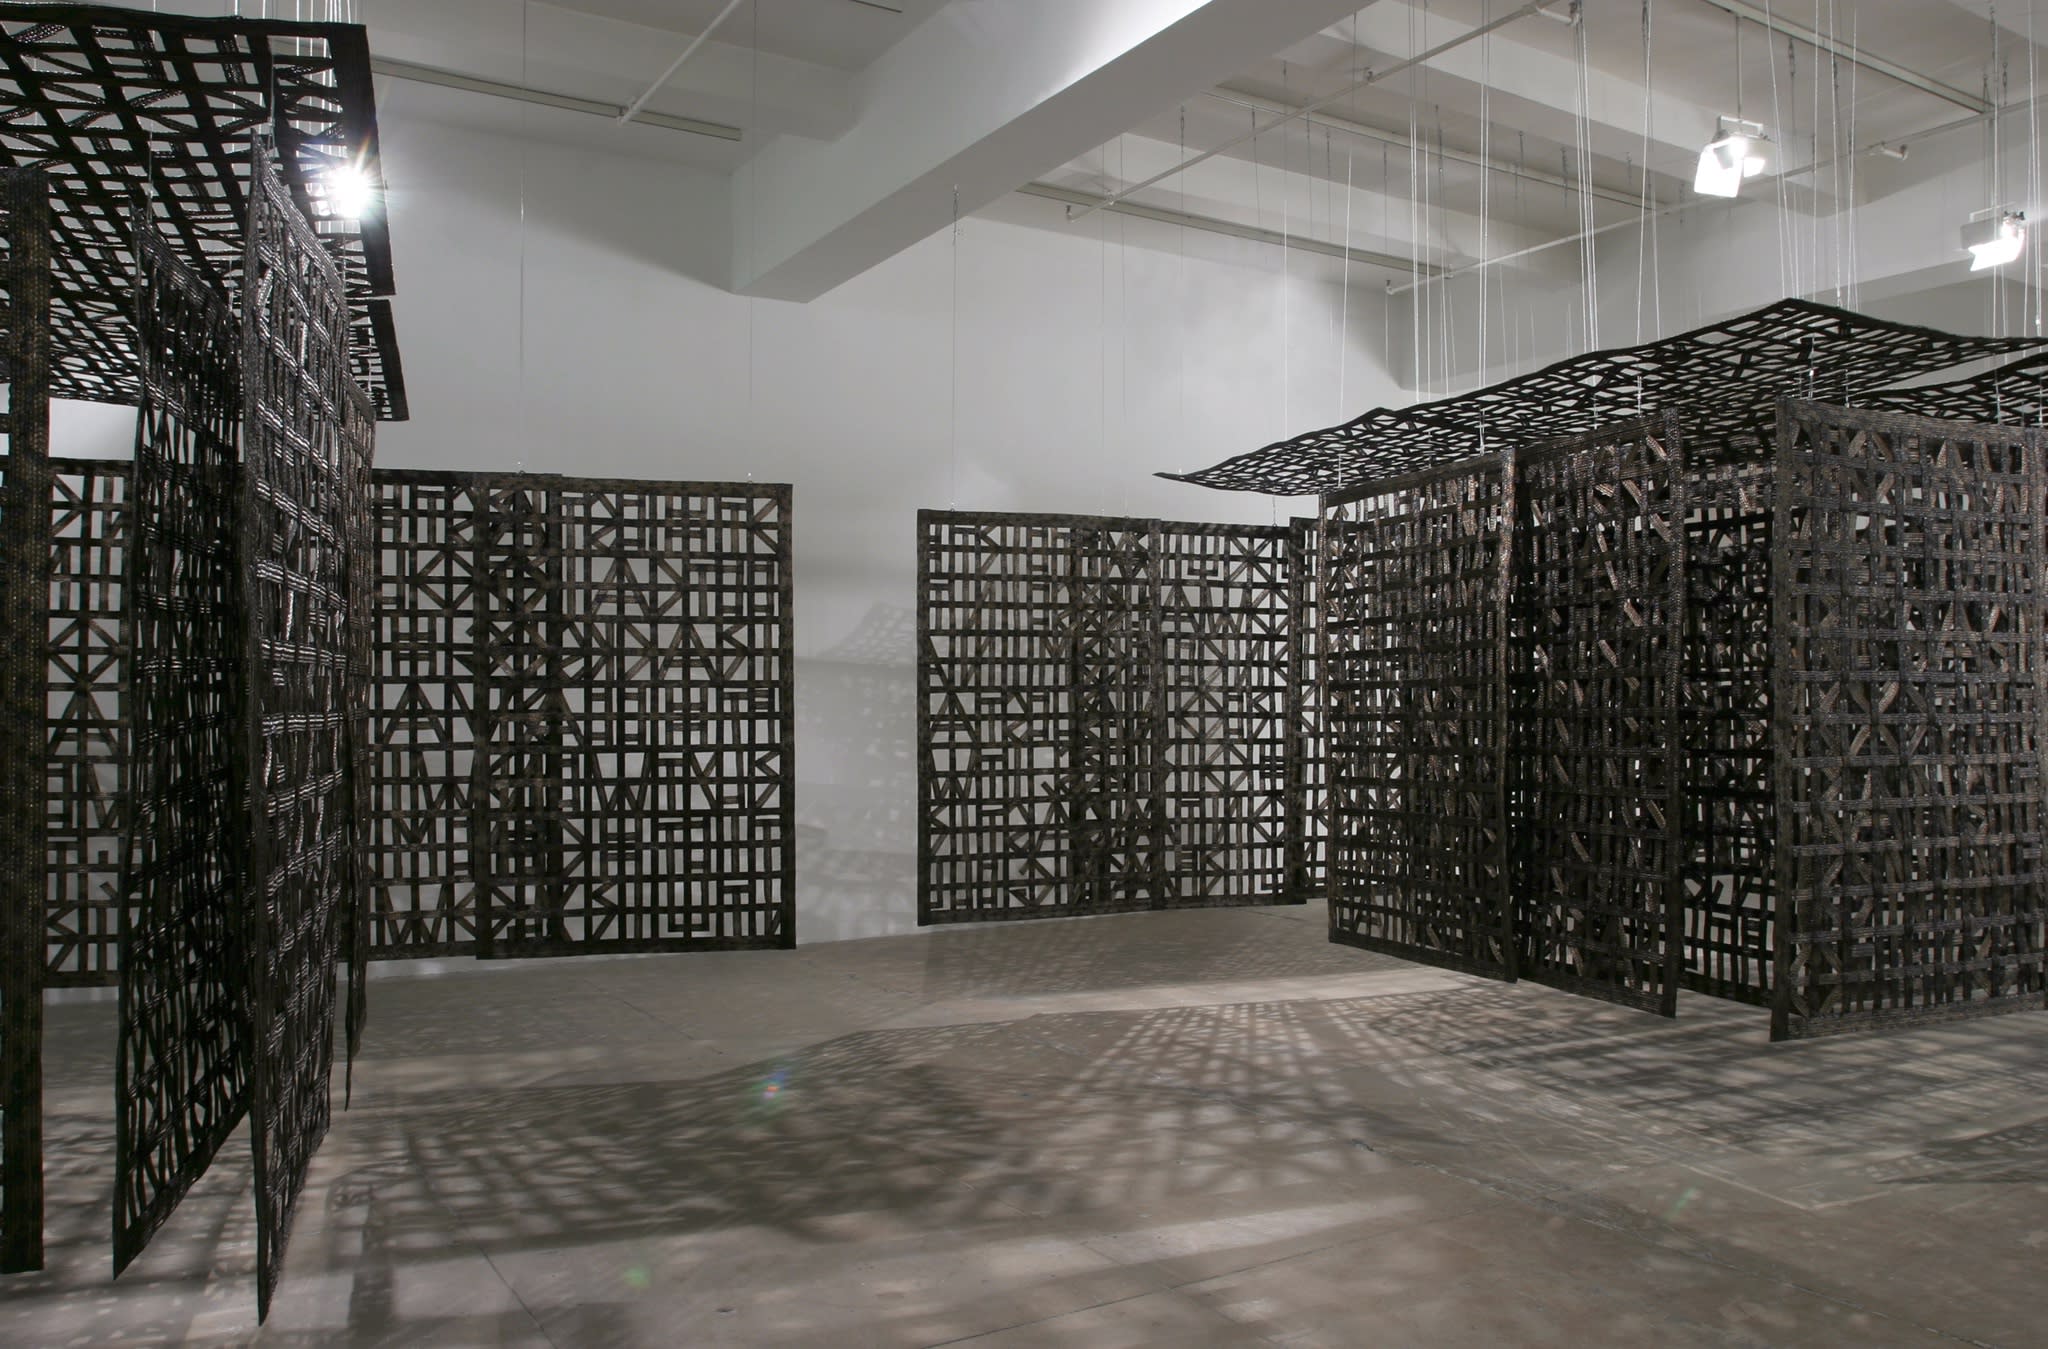 A large wooden sculpture, made up of several panels made up of wooden carved patterns which hang from the ceiling, forming a partially enclosed space.